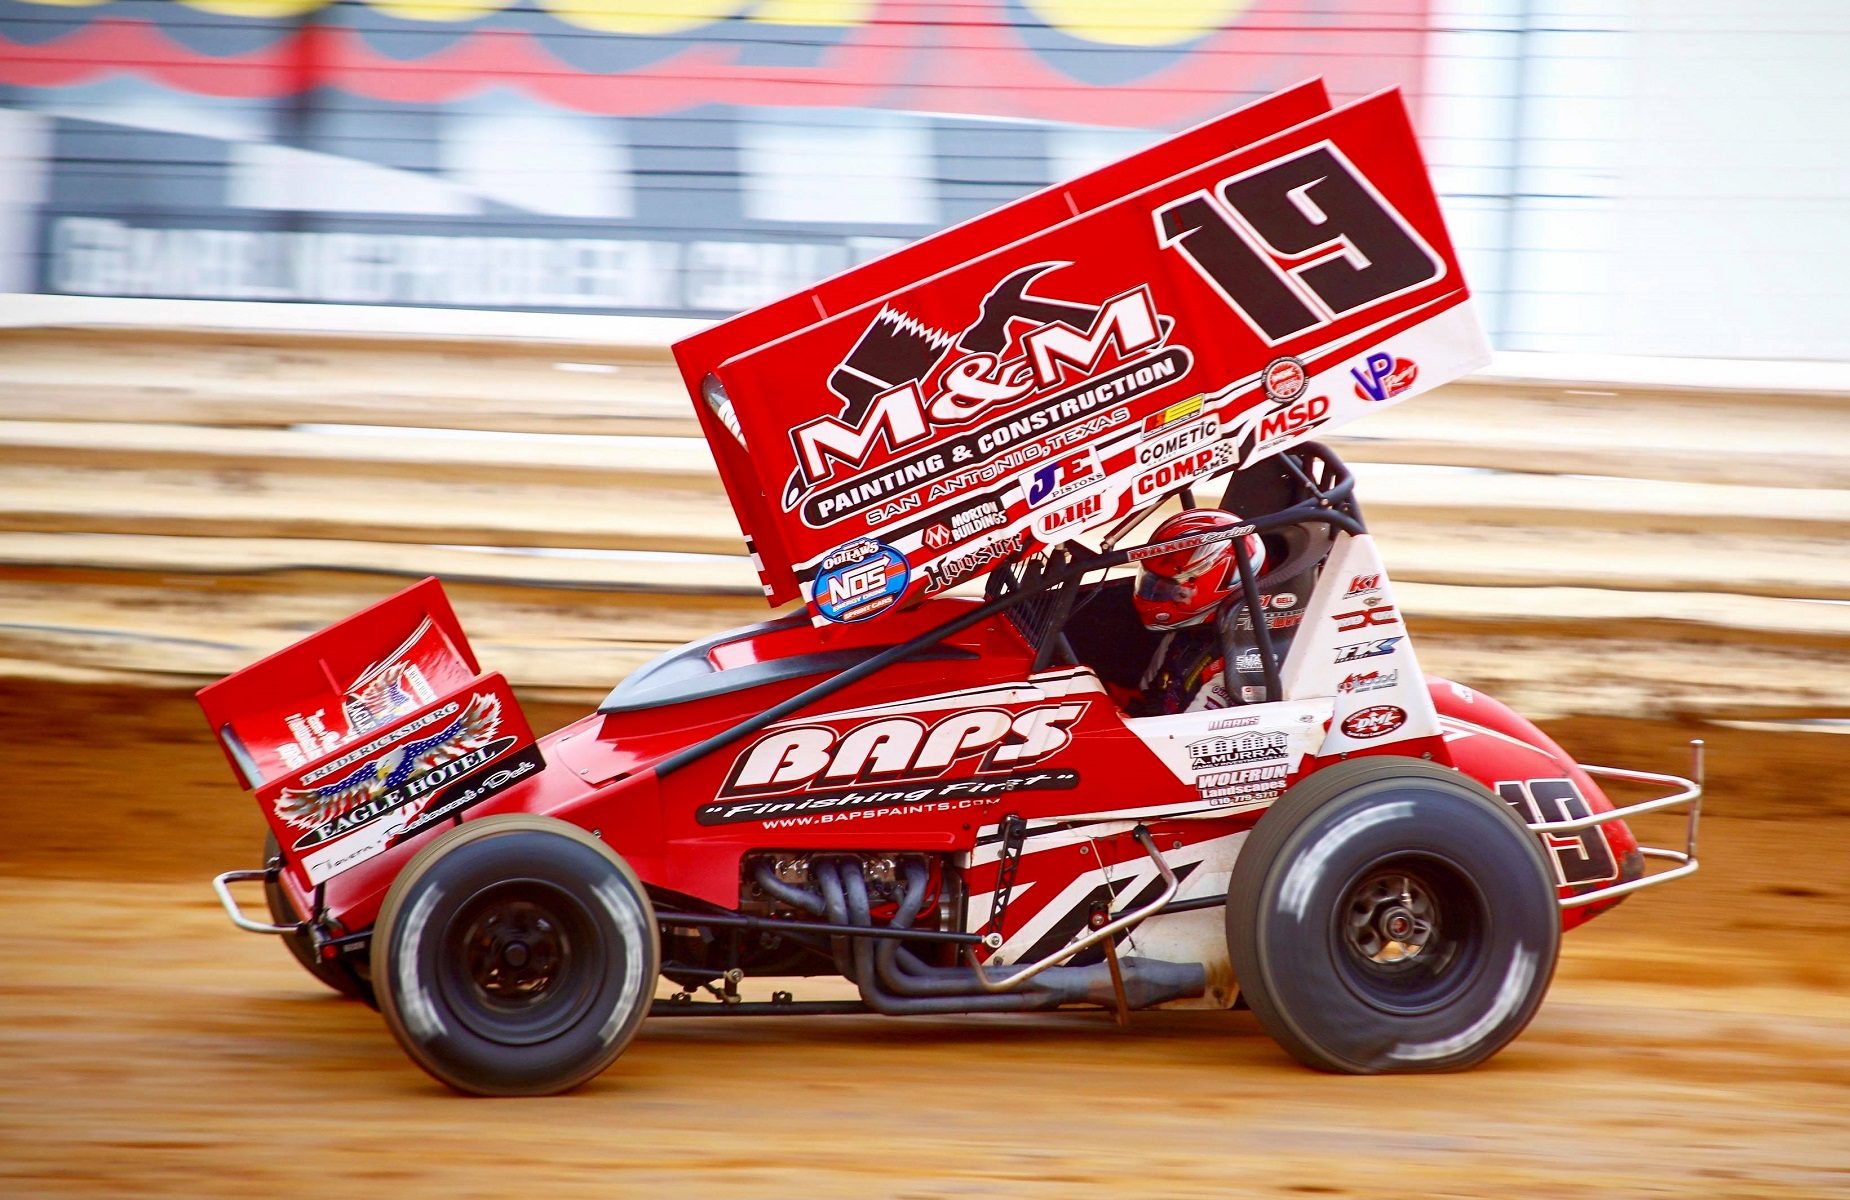 Brent Marks continues topten streak with hard charging performance at